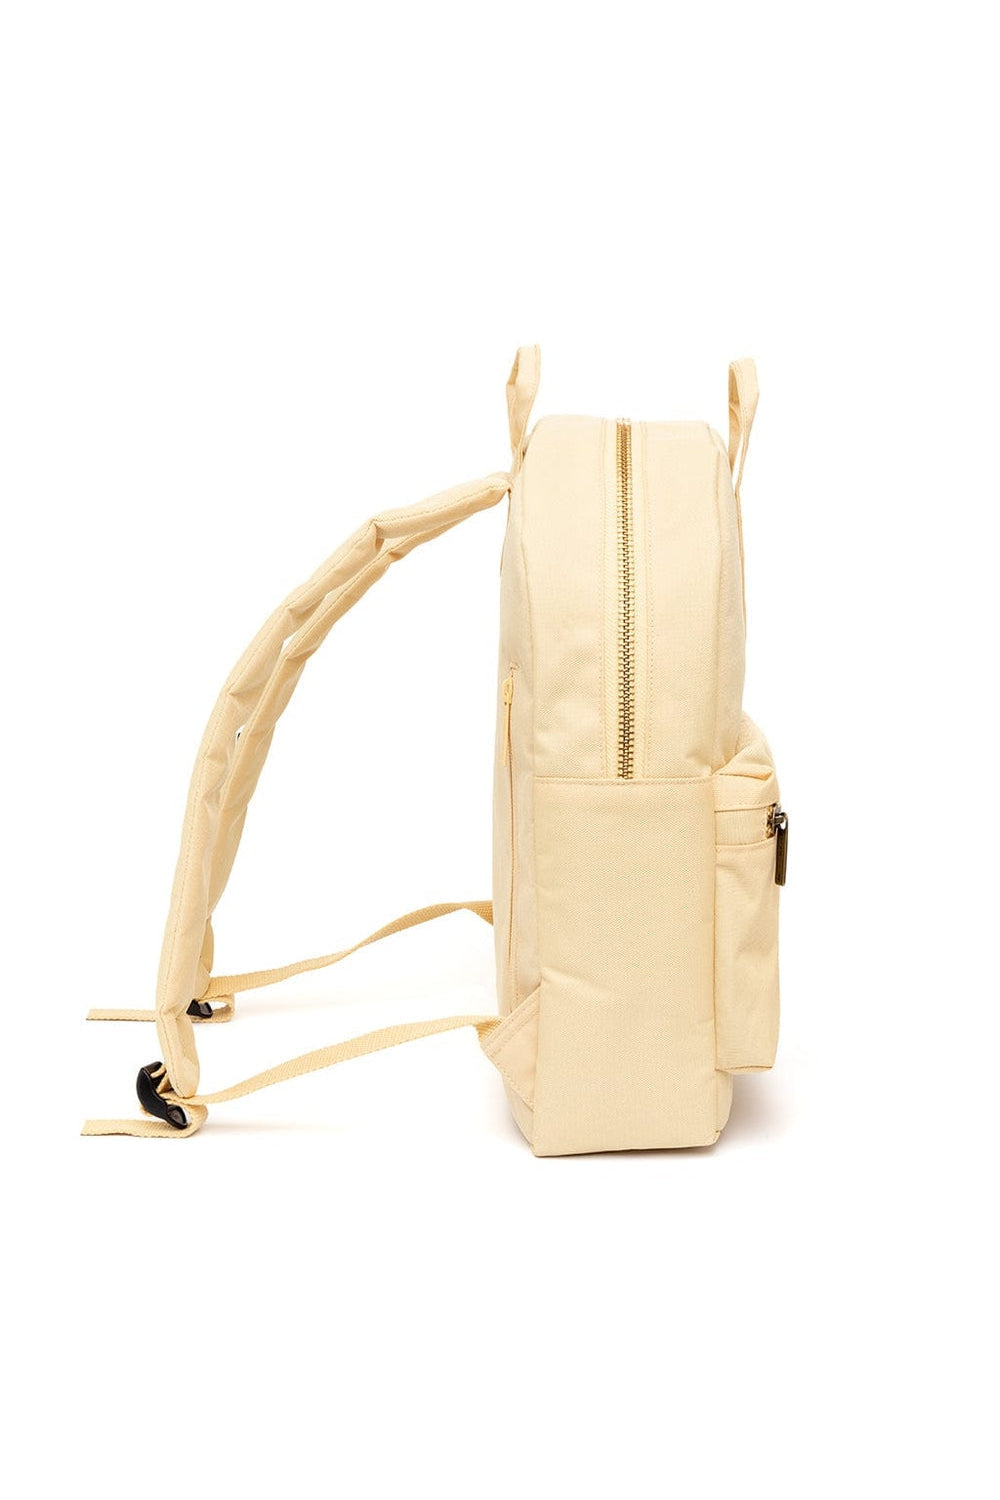 Lefrik Gold Classic Butter-Accessories-Ohh! By Gum - Shop Sustainable